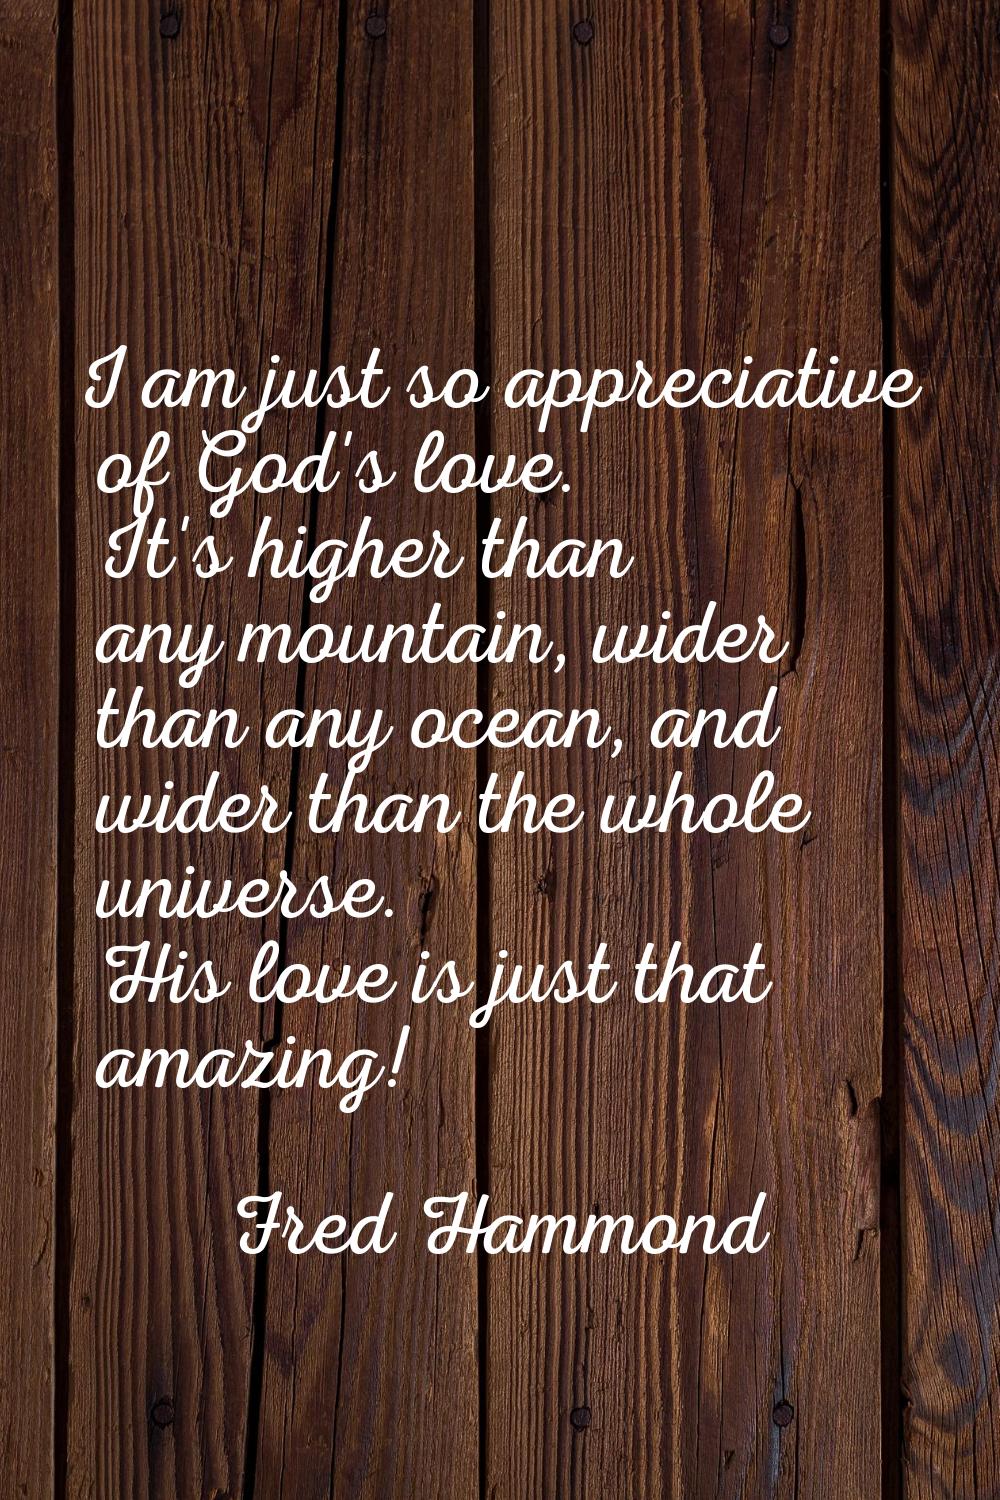 I am just so appreciative of God's love. It's higher than any mountain, wider than any ocean, and w